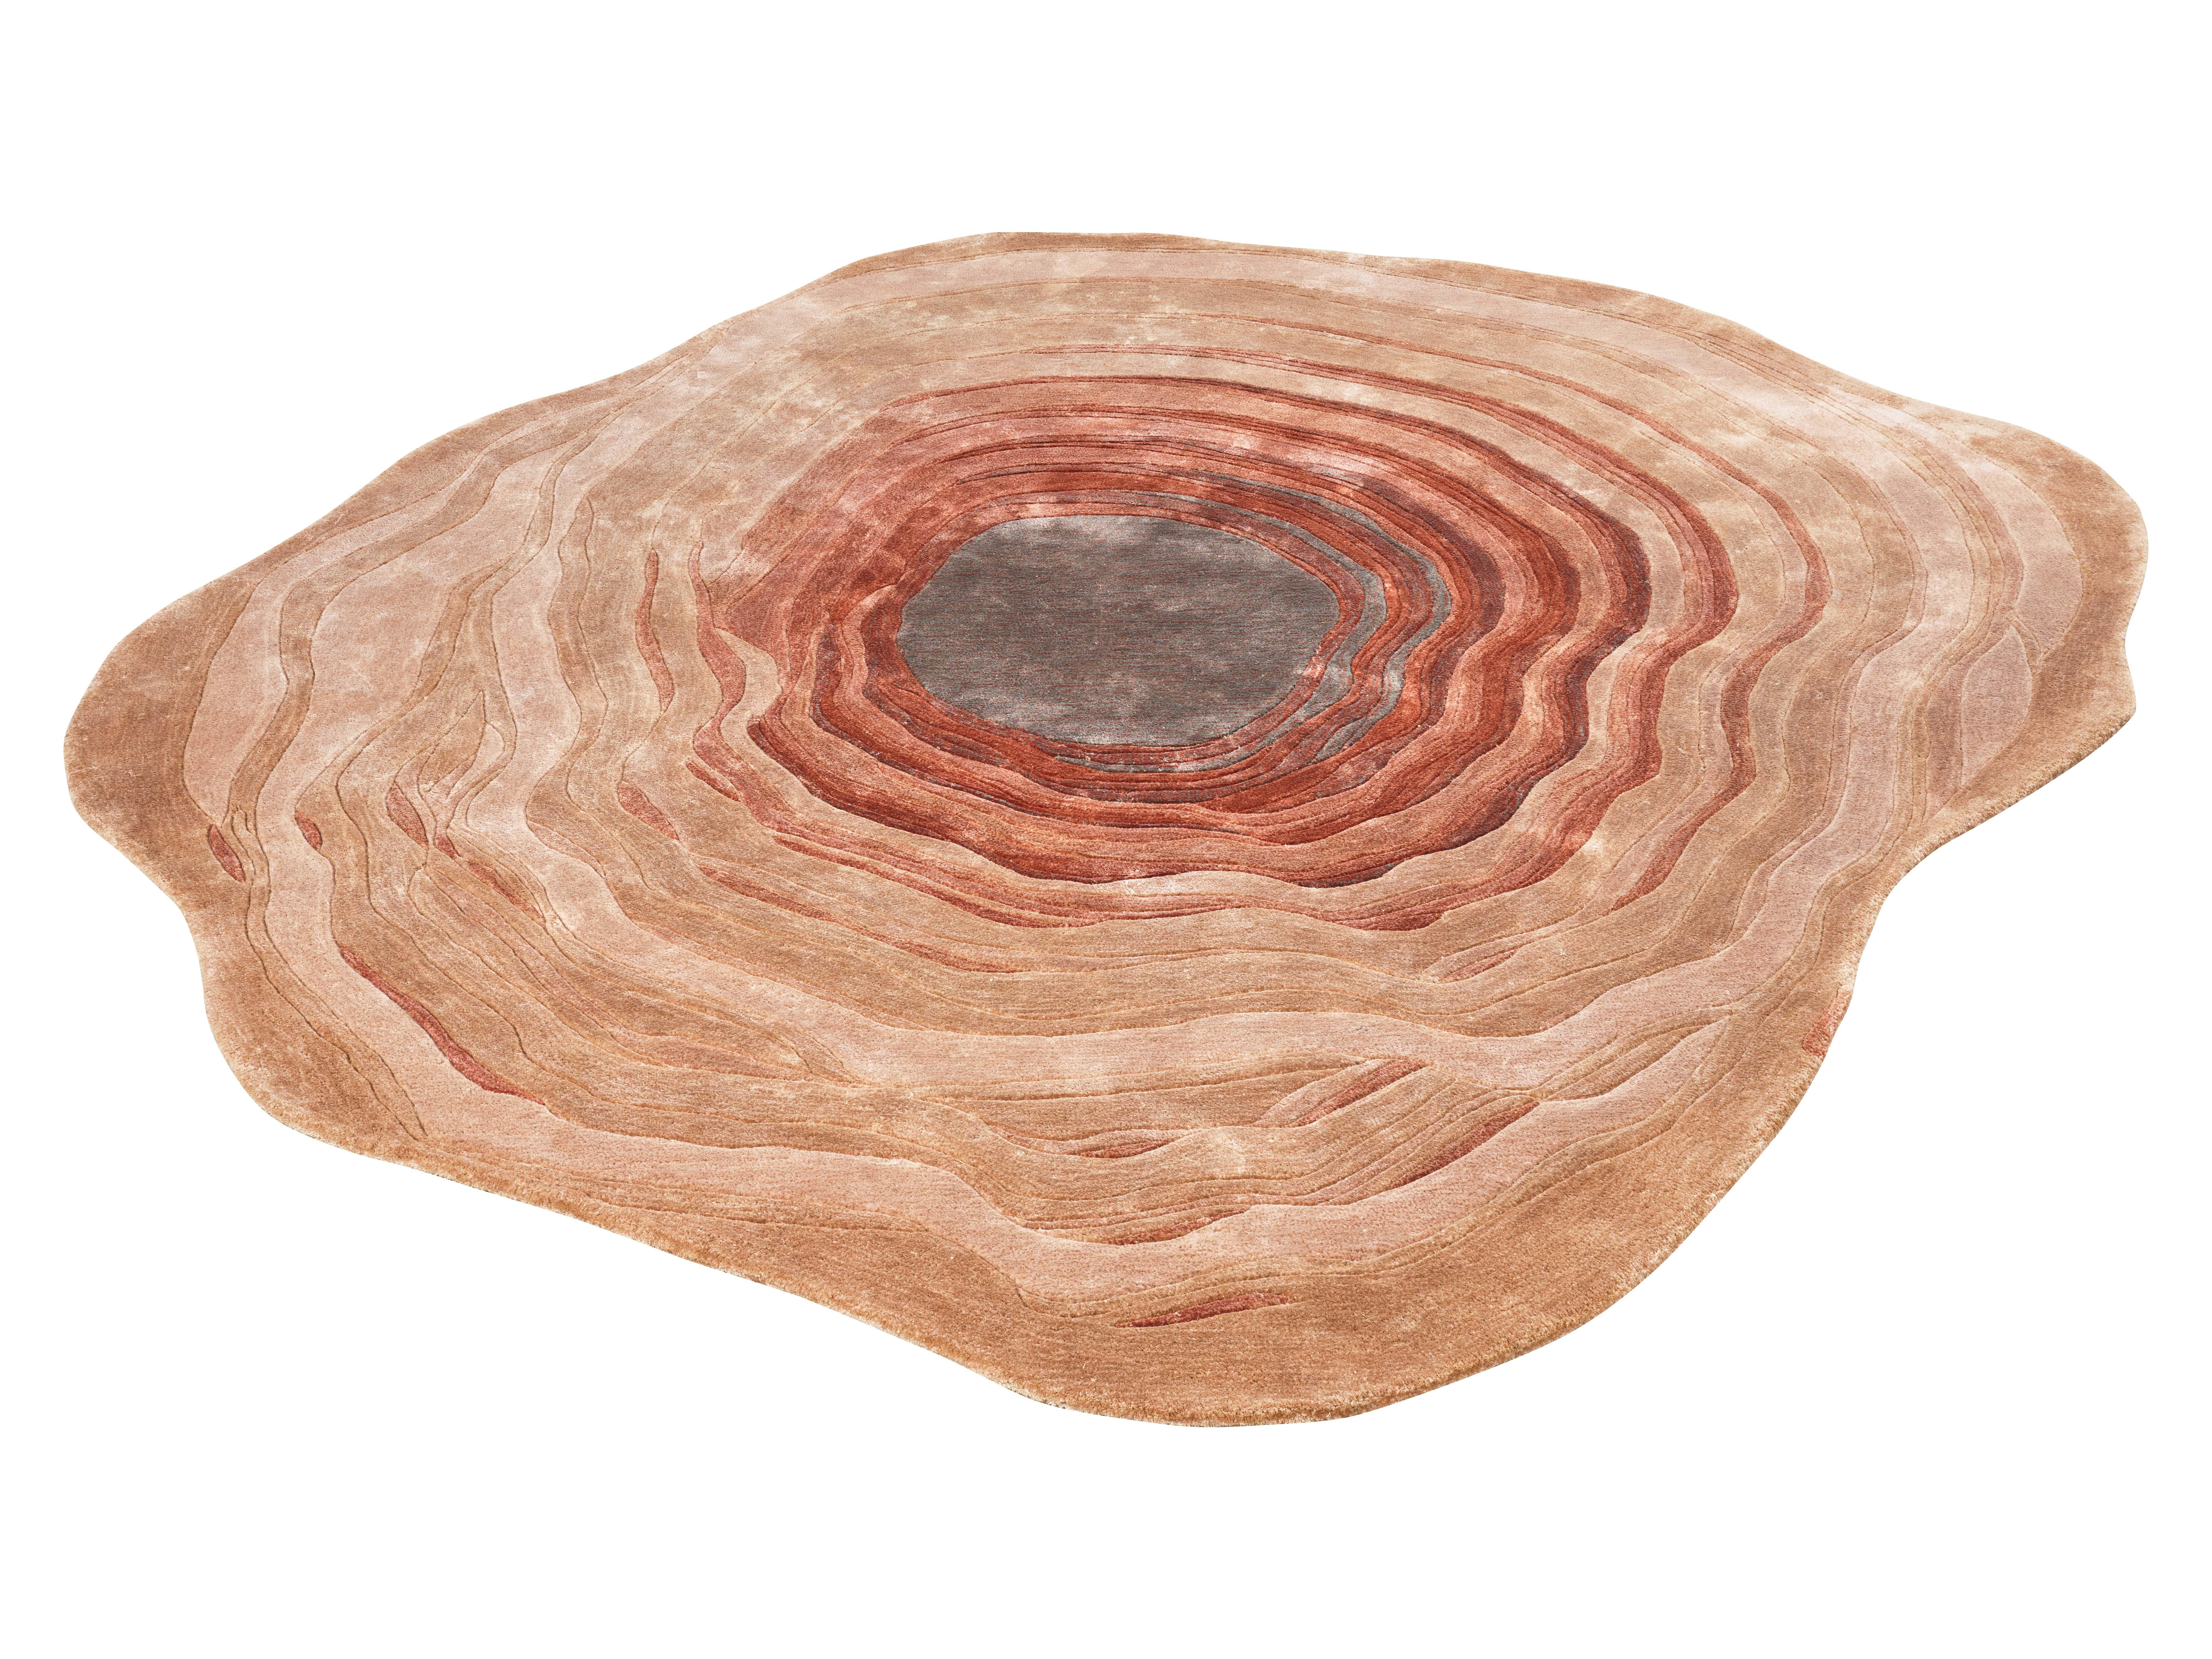 The spiral patterns of the fire waves on the sedimentary rocks are reflected perfectly in the design of the carpet. These formations are carved out from the shifting of the sand dunes. The wave is a staggering sandstone rock formation where the